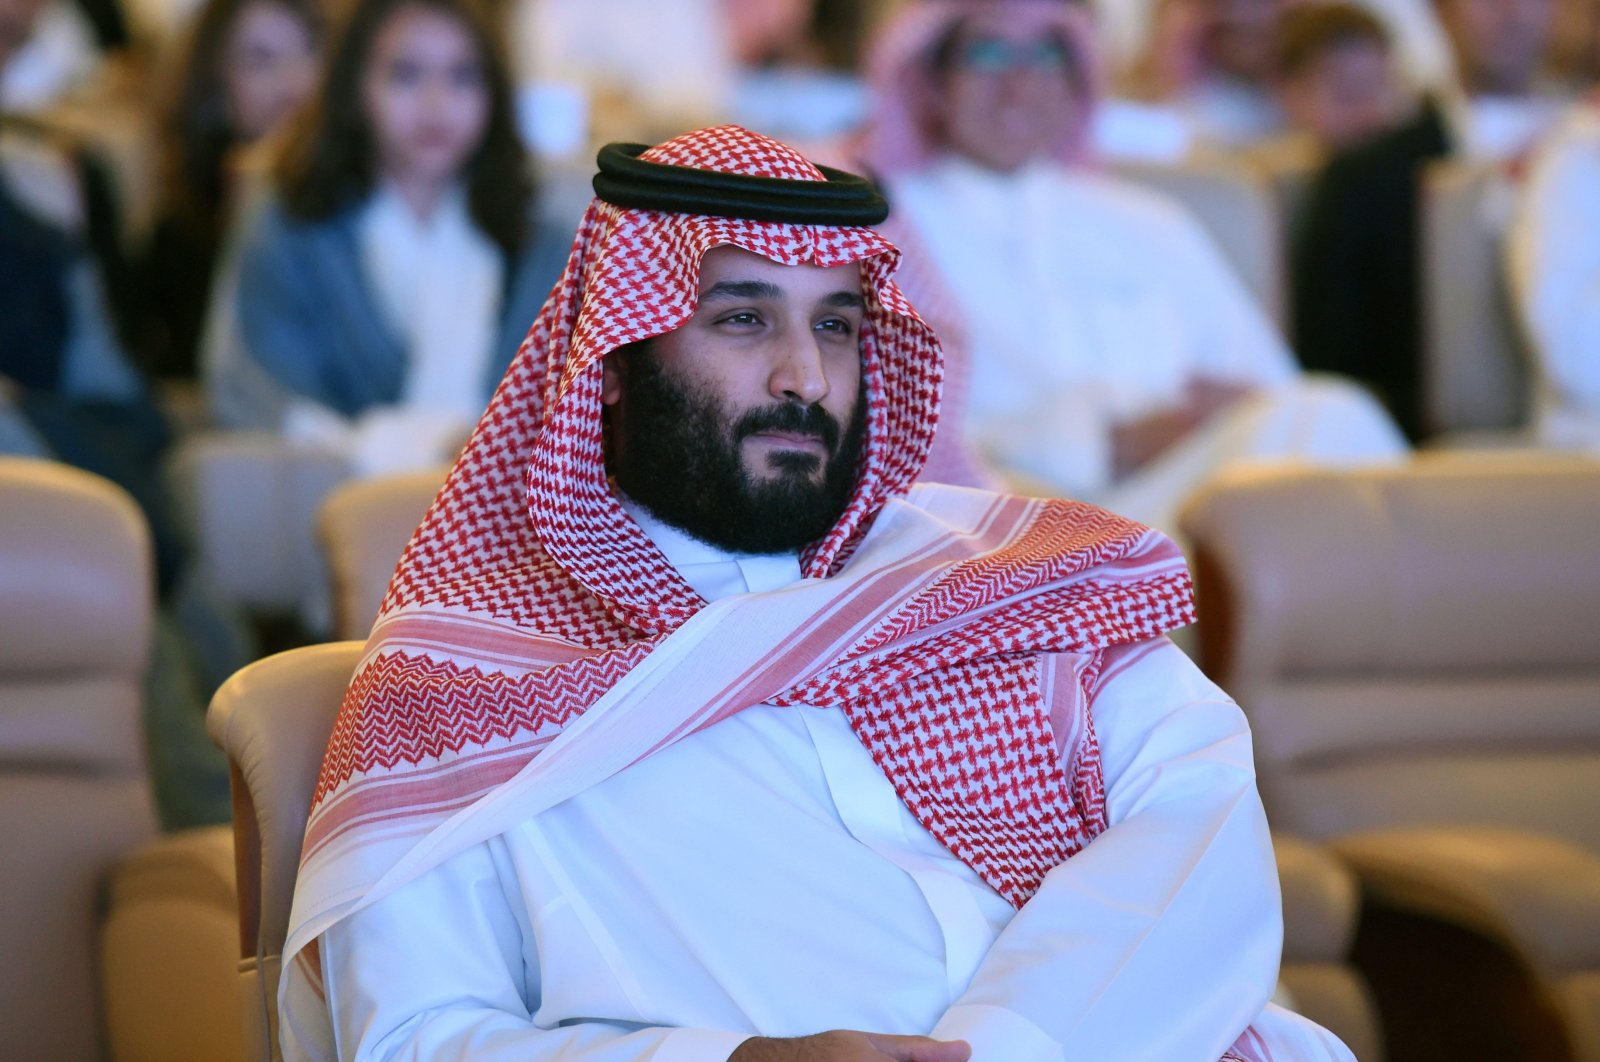 Saudi Crown Prince Mohammed bin Salman attending the Future Investment Initiative (FII) conference in Riyadh, 2017. (AFP Photo)